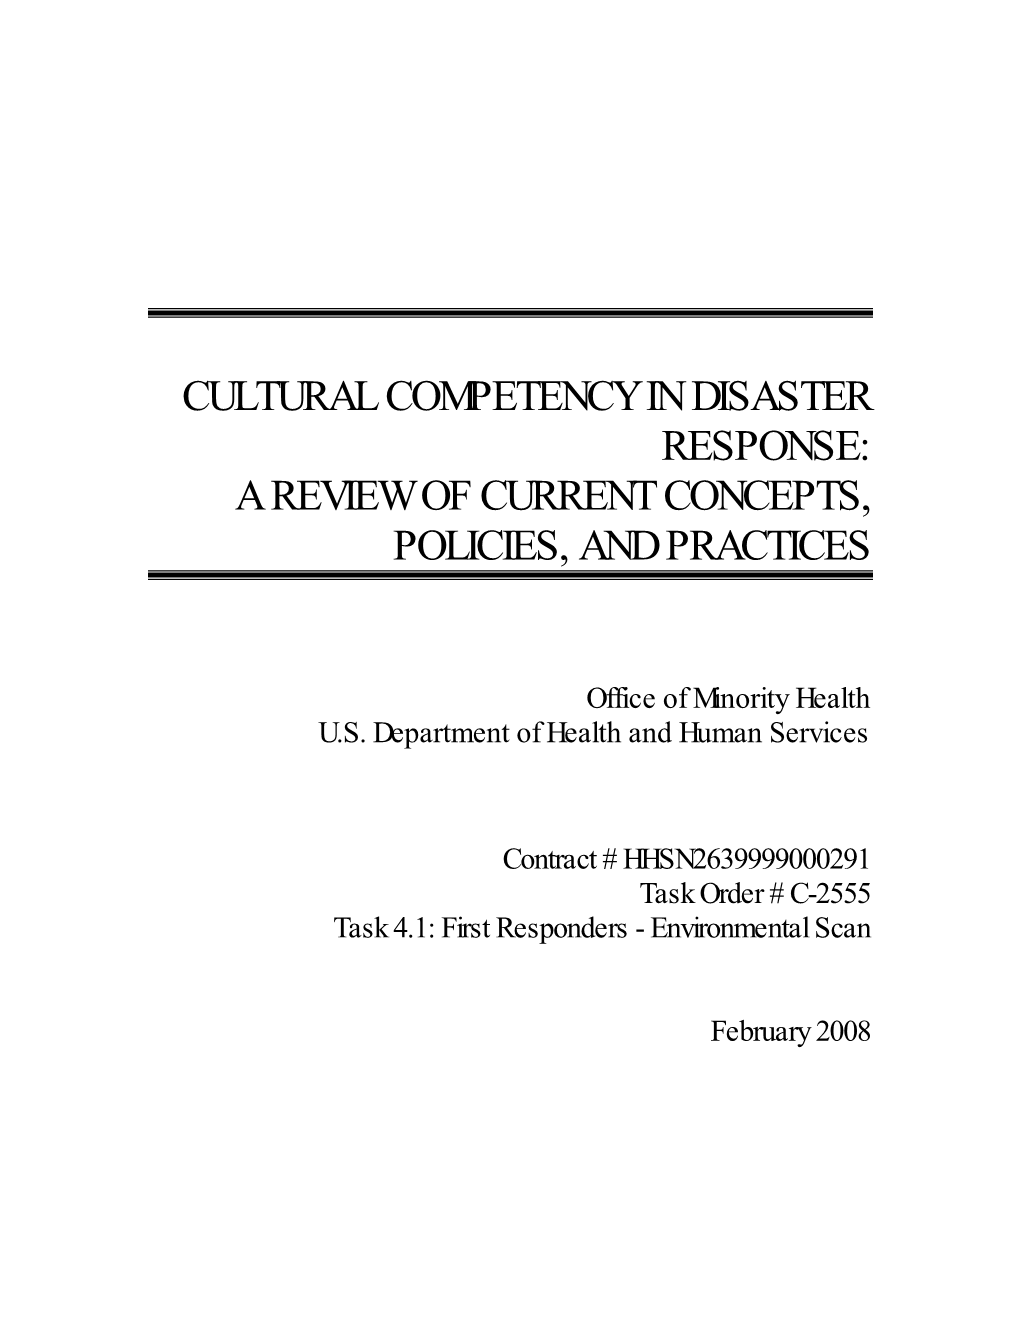 Cultural Competency in Disaster Response: a Review of Current Concepts, Policies, and Practices